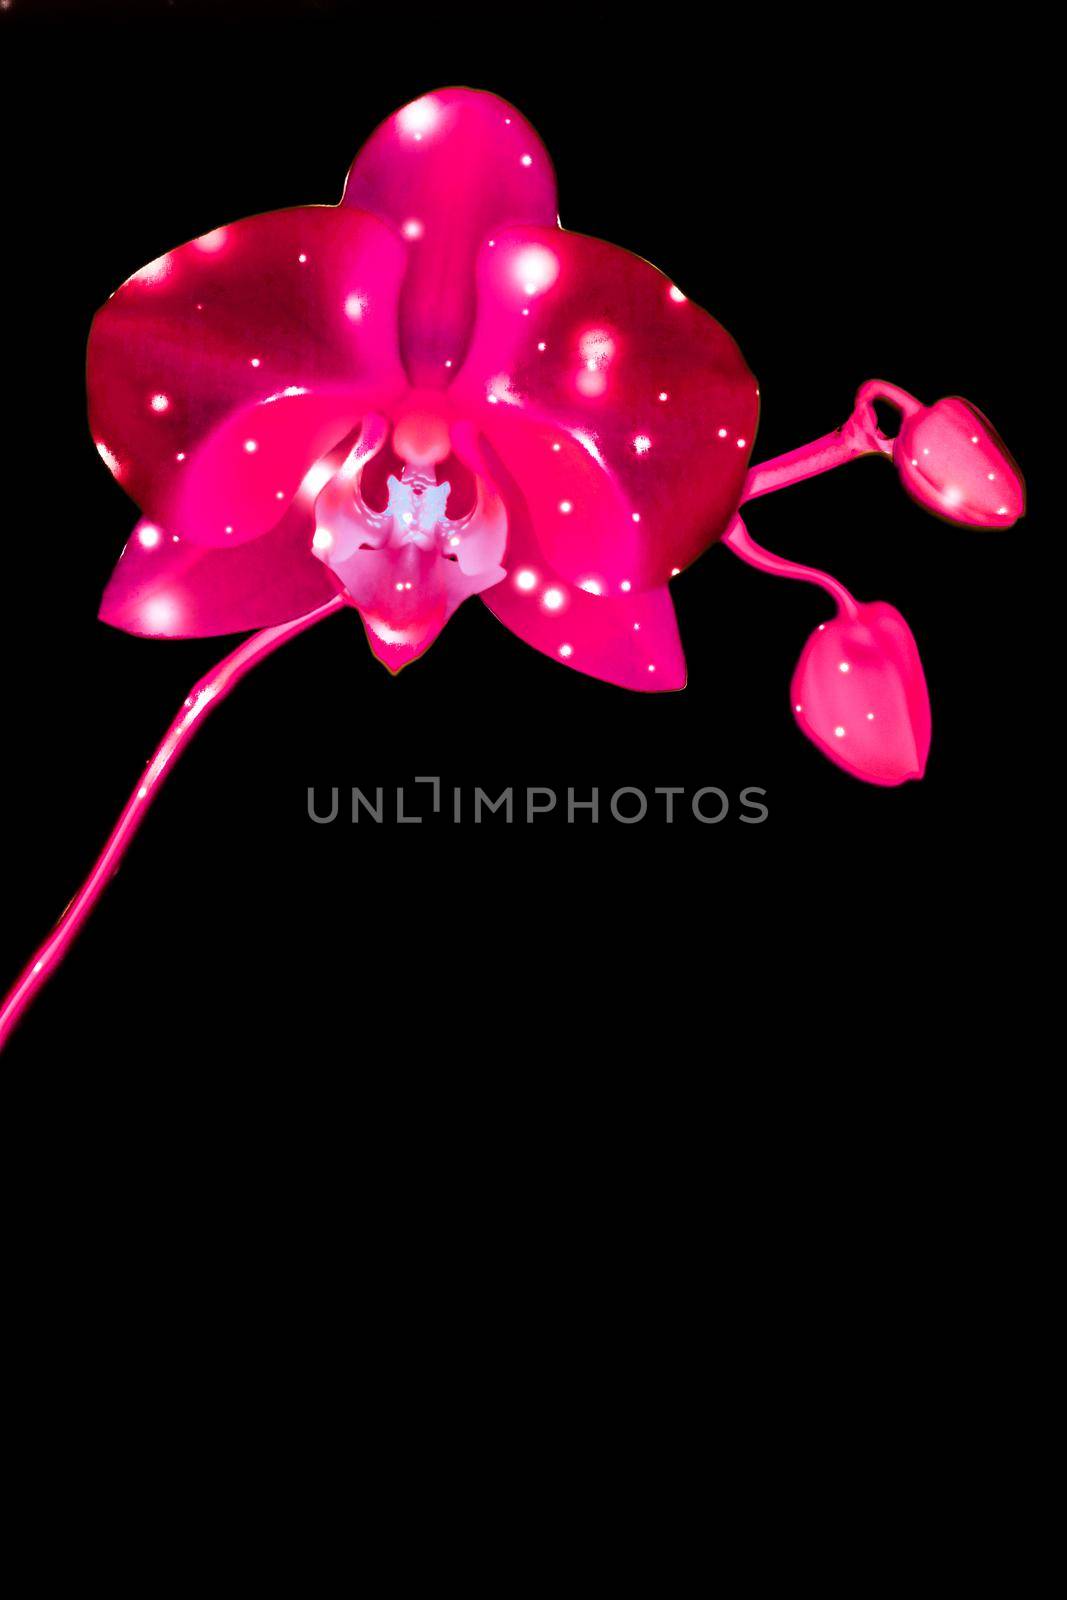 Blooming flowers, botanical design and nature beauty concept - Orchid flower in bloom, abstract floral art background